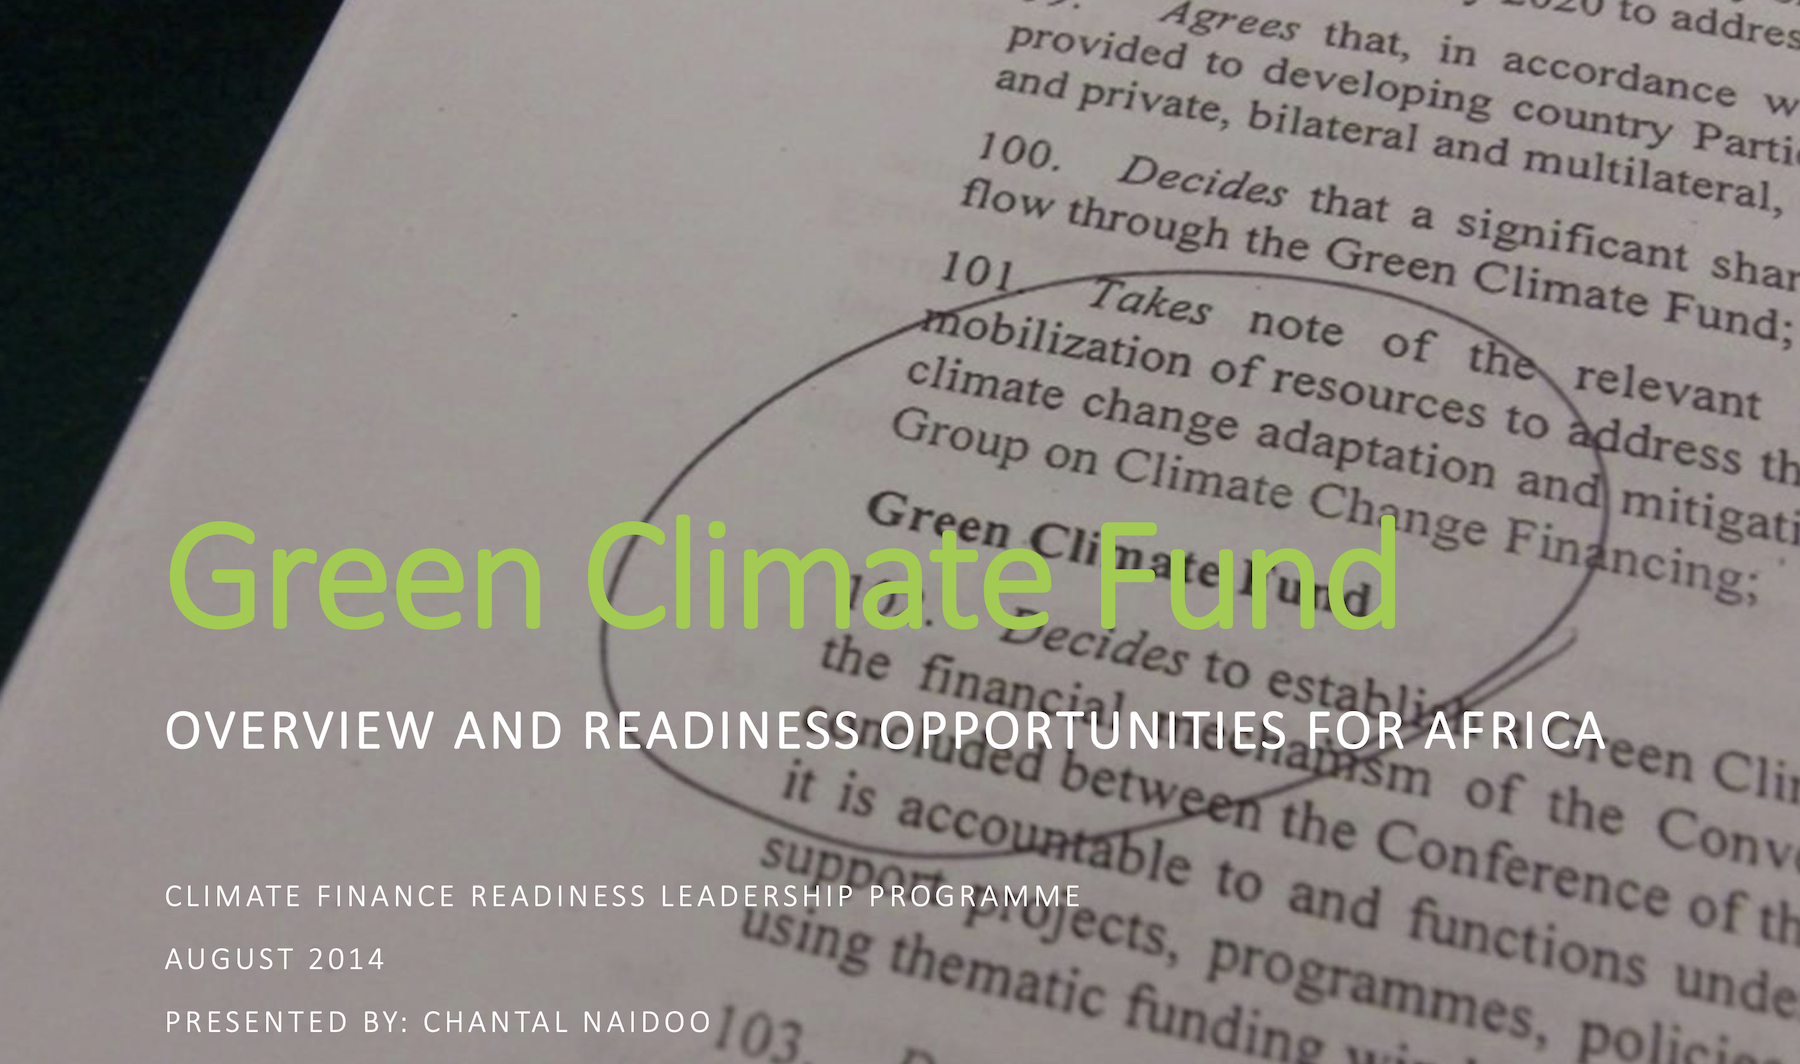 Green Climate Fund: overview and readiness opportunities for Africa